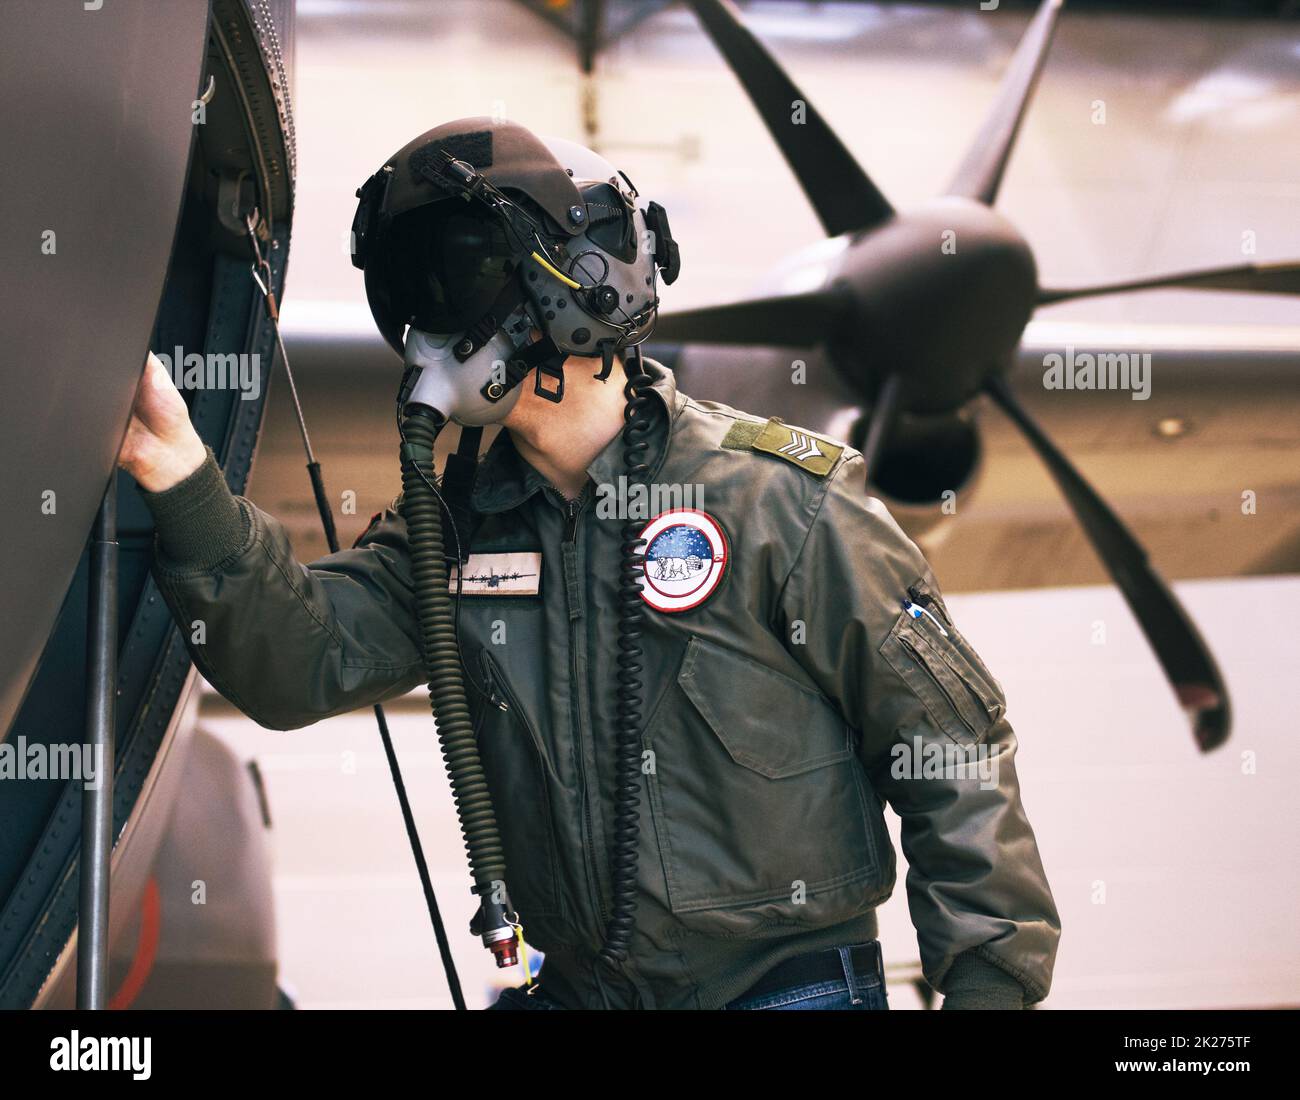 Prepping for war. Shot of a fighter pilot inspecting his aircraft. Stock Photo